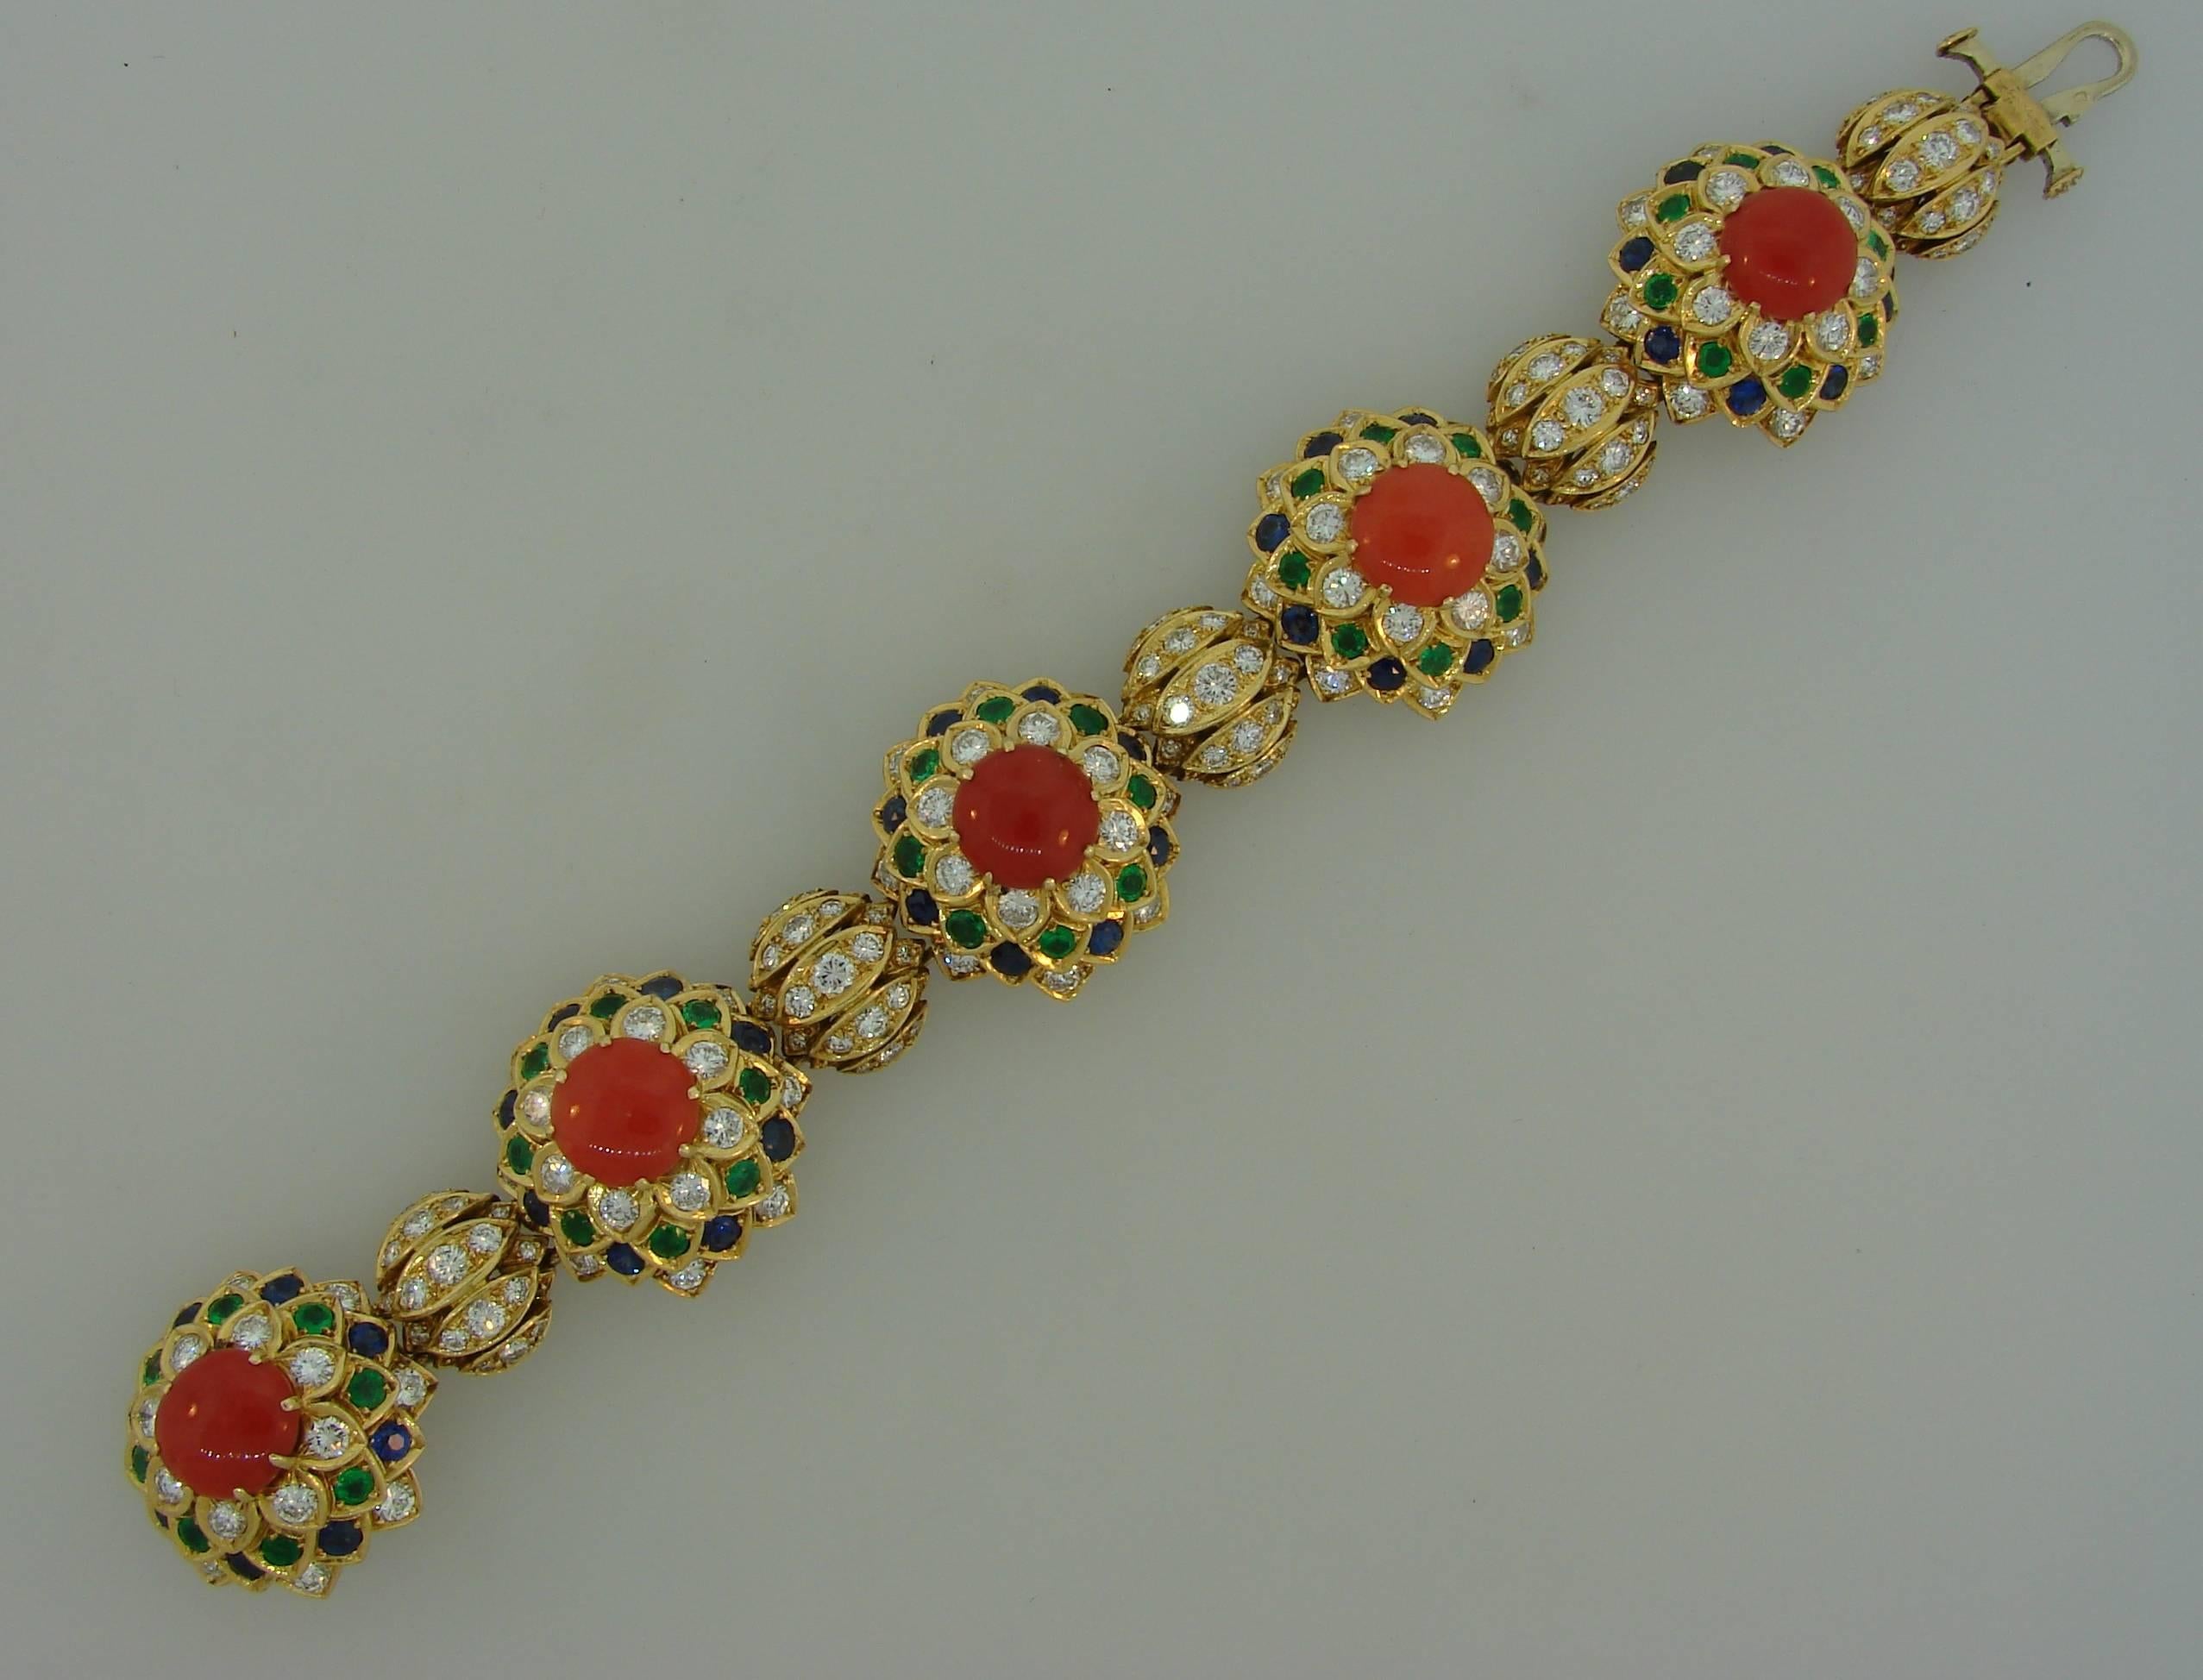 Chic colorful bracelet created by Cartier in the 1950's. Rare. Its design was inspired by Louis Cartier travels to Russia Features five coral cabochons set in 18 karat yellow gold and accented with diamonds, sapphires and emeralds. Approximate total